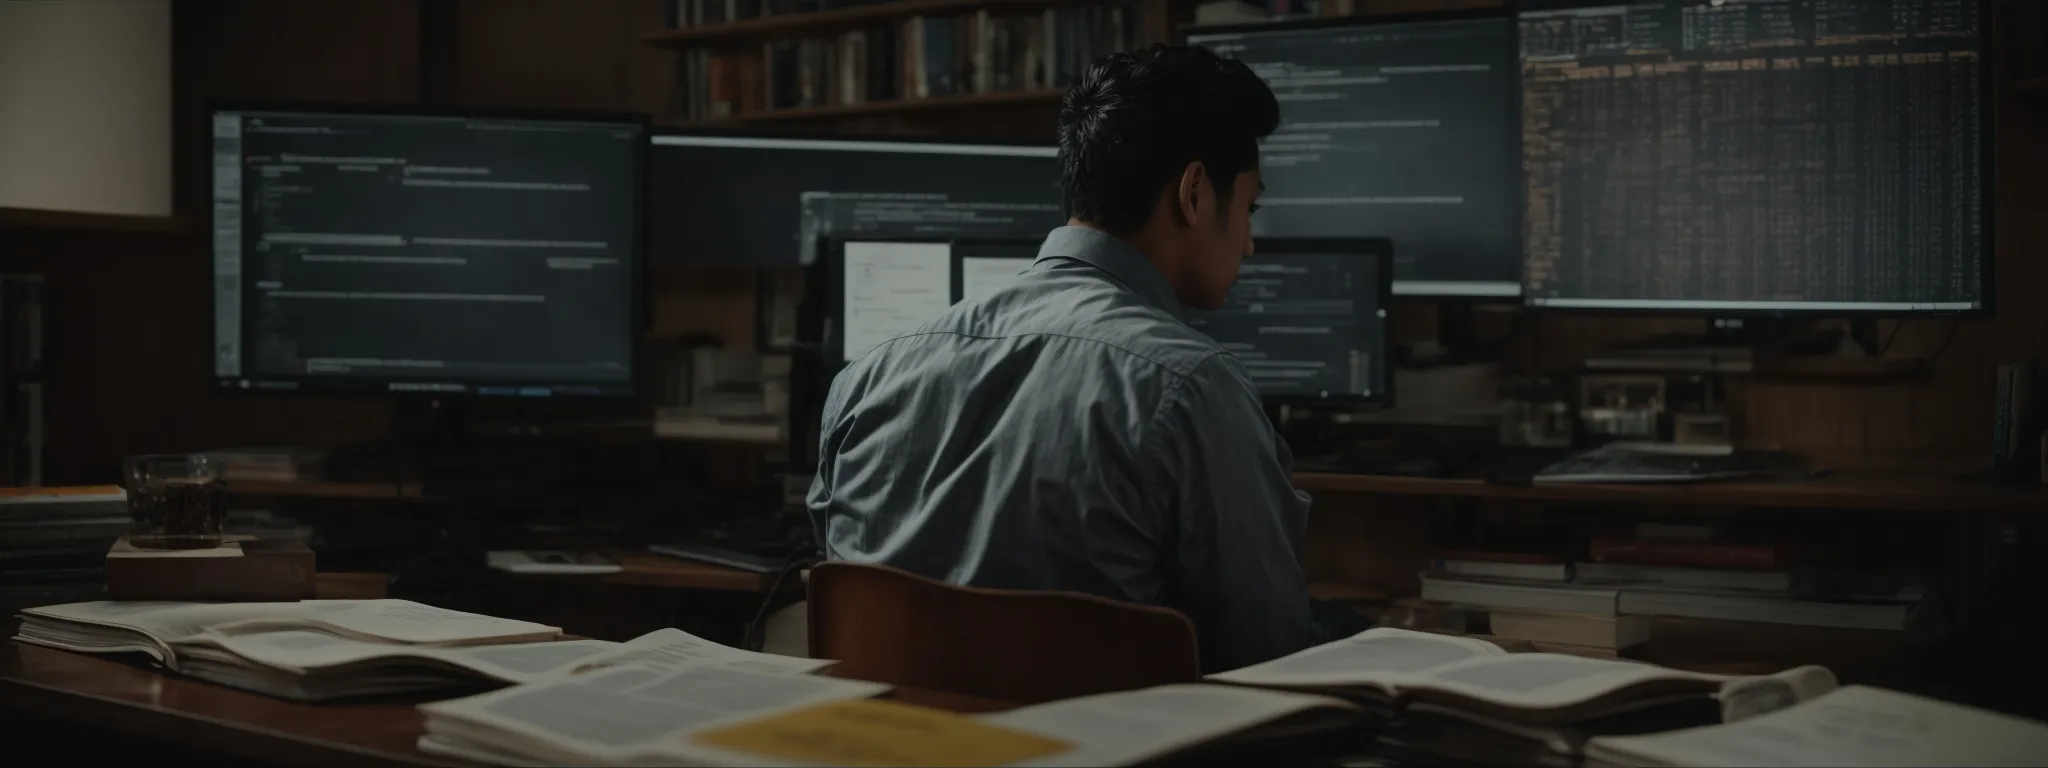 a person sits in front of a computer, surrounded by books and notes, intently analyzing digital marketing data on the screen.